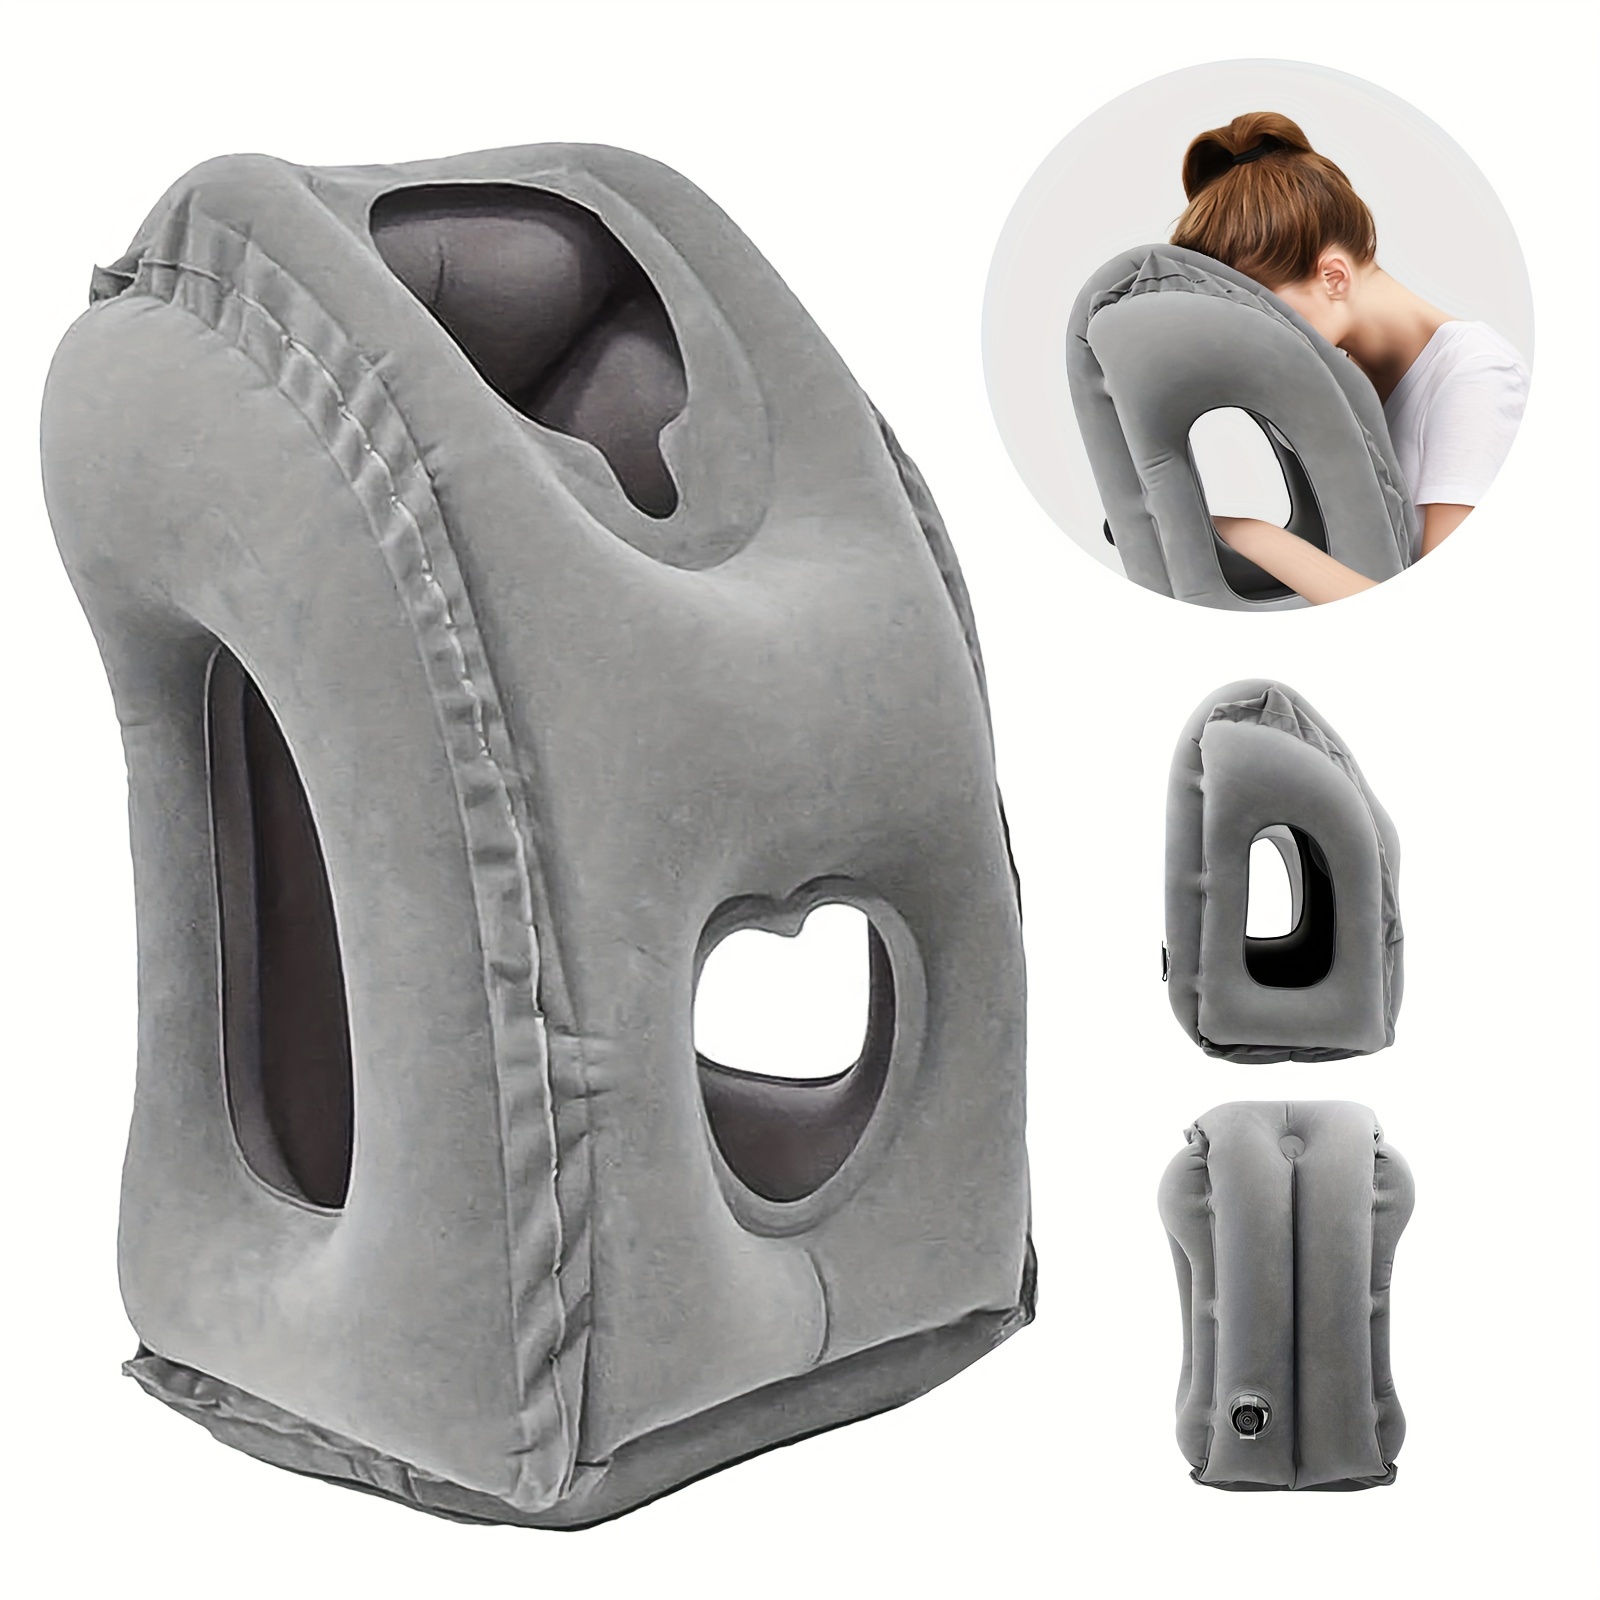 

Ergonomic Inflatable Travel Pillow With Patented Valve - Lightweight, Neck & Head Support For Long Flights, Cars, Trains, And Office Naps Travel Pillow Neck Pillow Neck Pillow For Travel For Plane